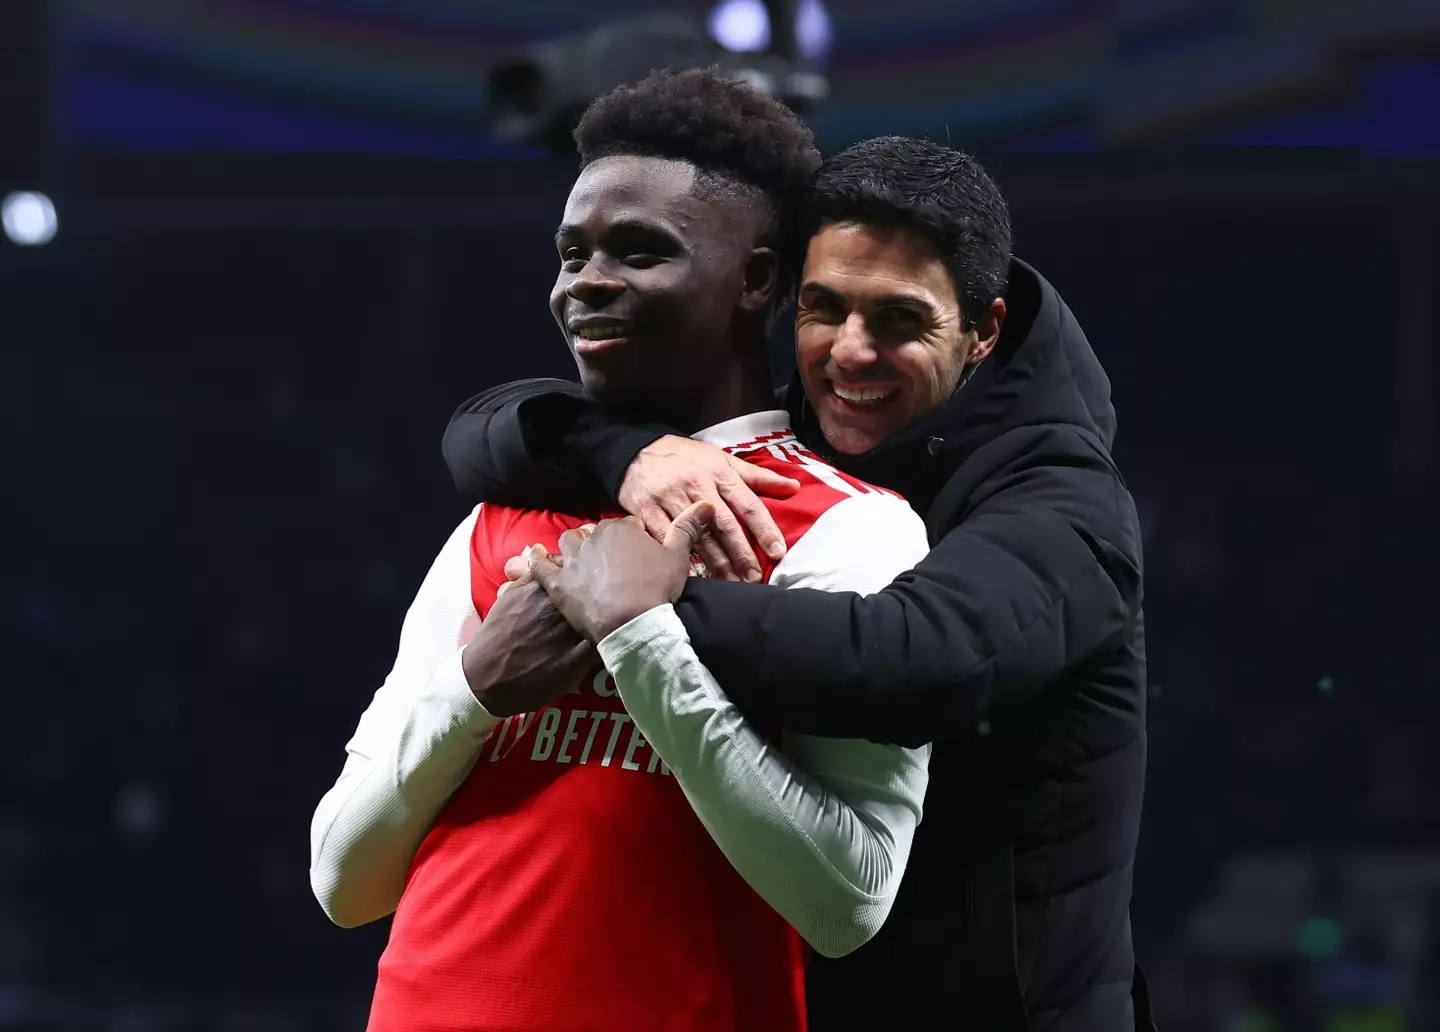 A supercomputer has tipped Arsenal manager Mikel Arteta to capture the Premier League title ahead of Manchester City boss Pep Guardiola.